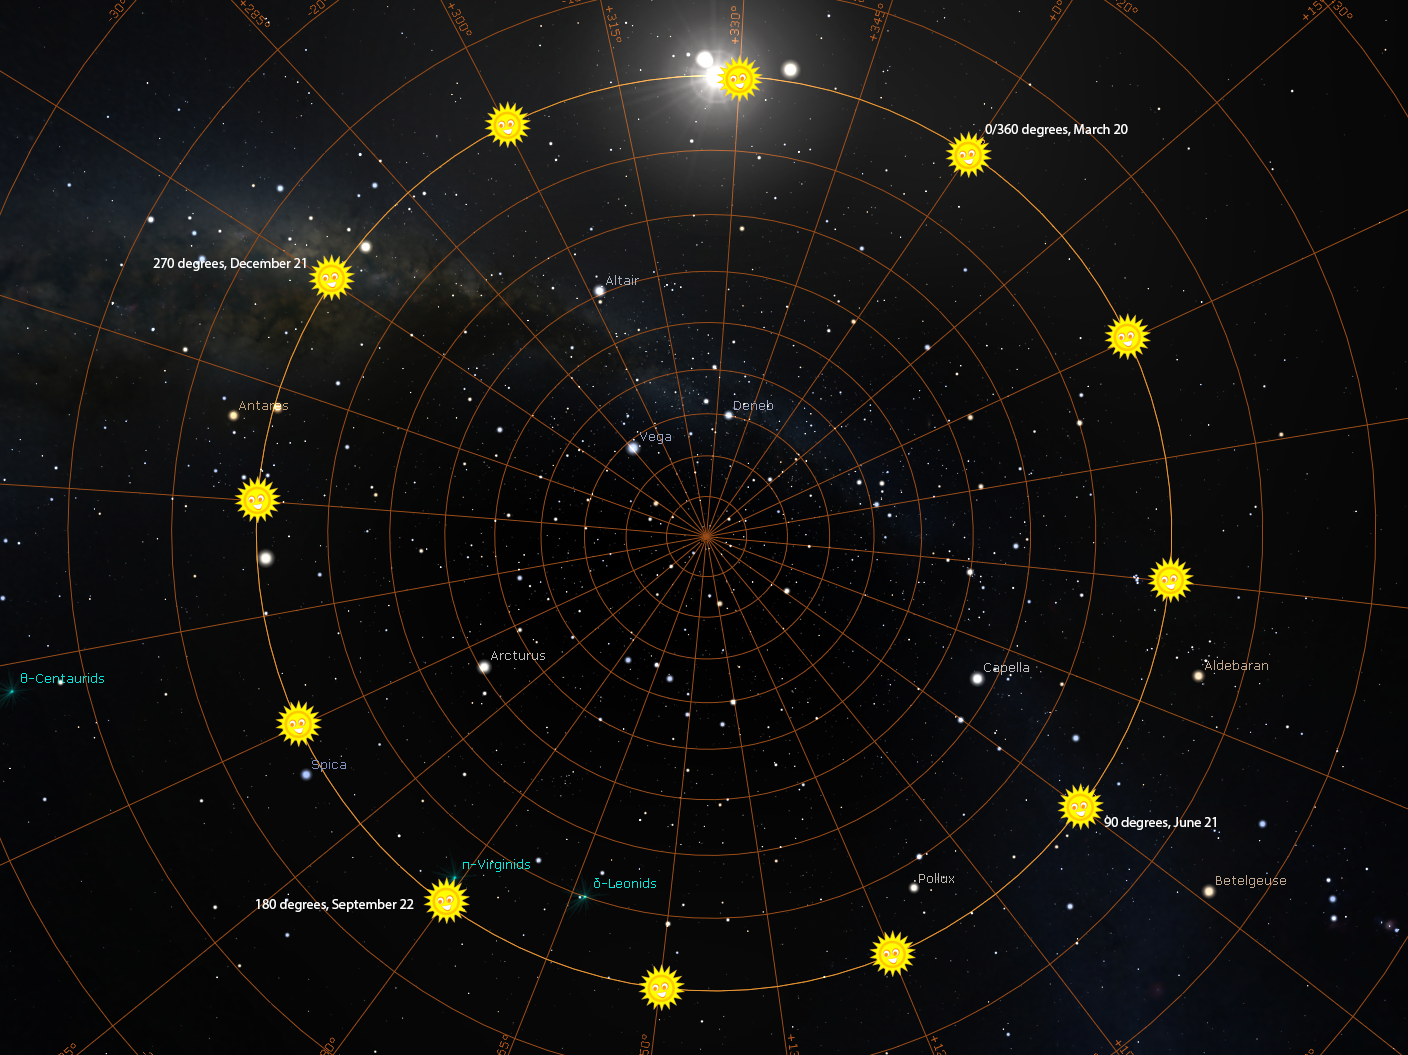 The ecliptic path of the Sun, with the principle solar terms illustrated. The north ecliptic pole is at the center of the image and the lines radiating away from it are lines of ecliptic longitude for every solar term (intervals of 15 degrees).